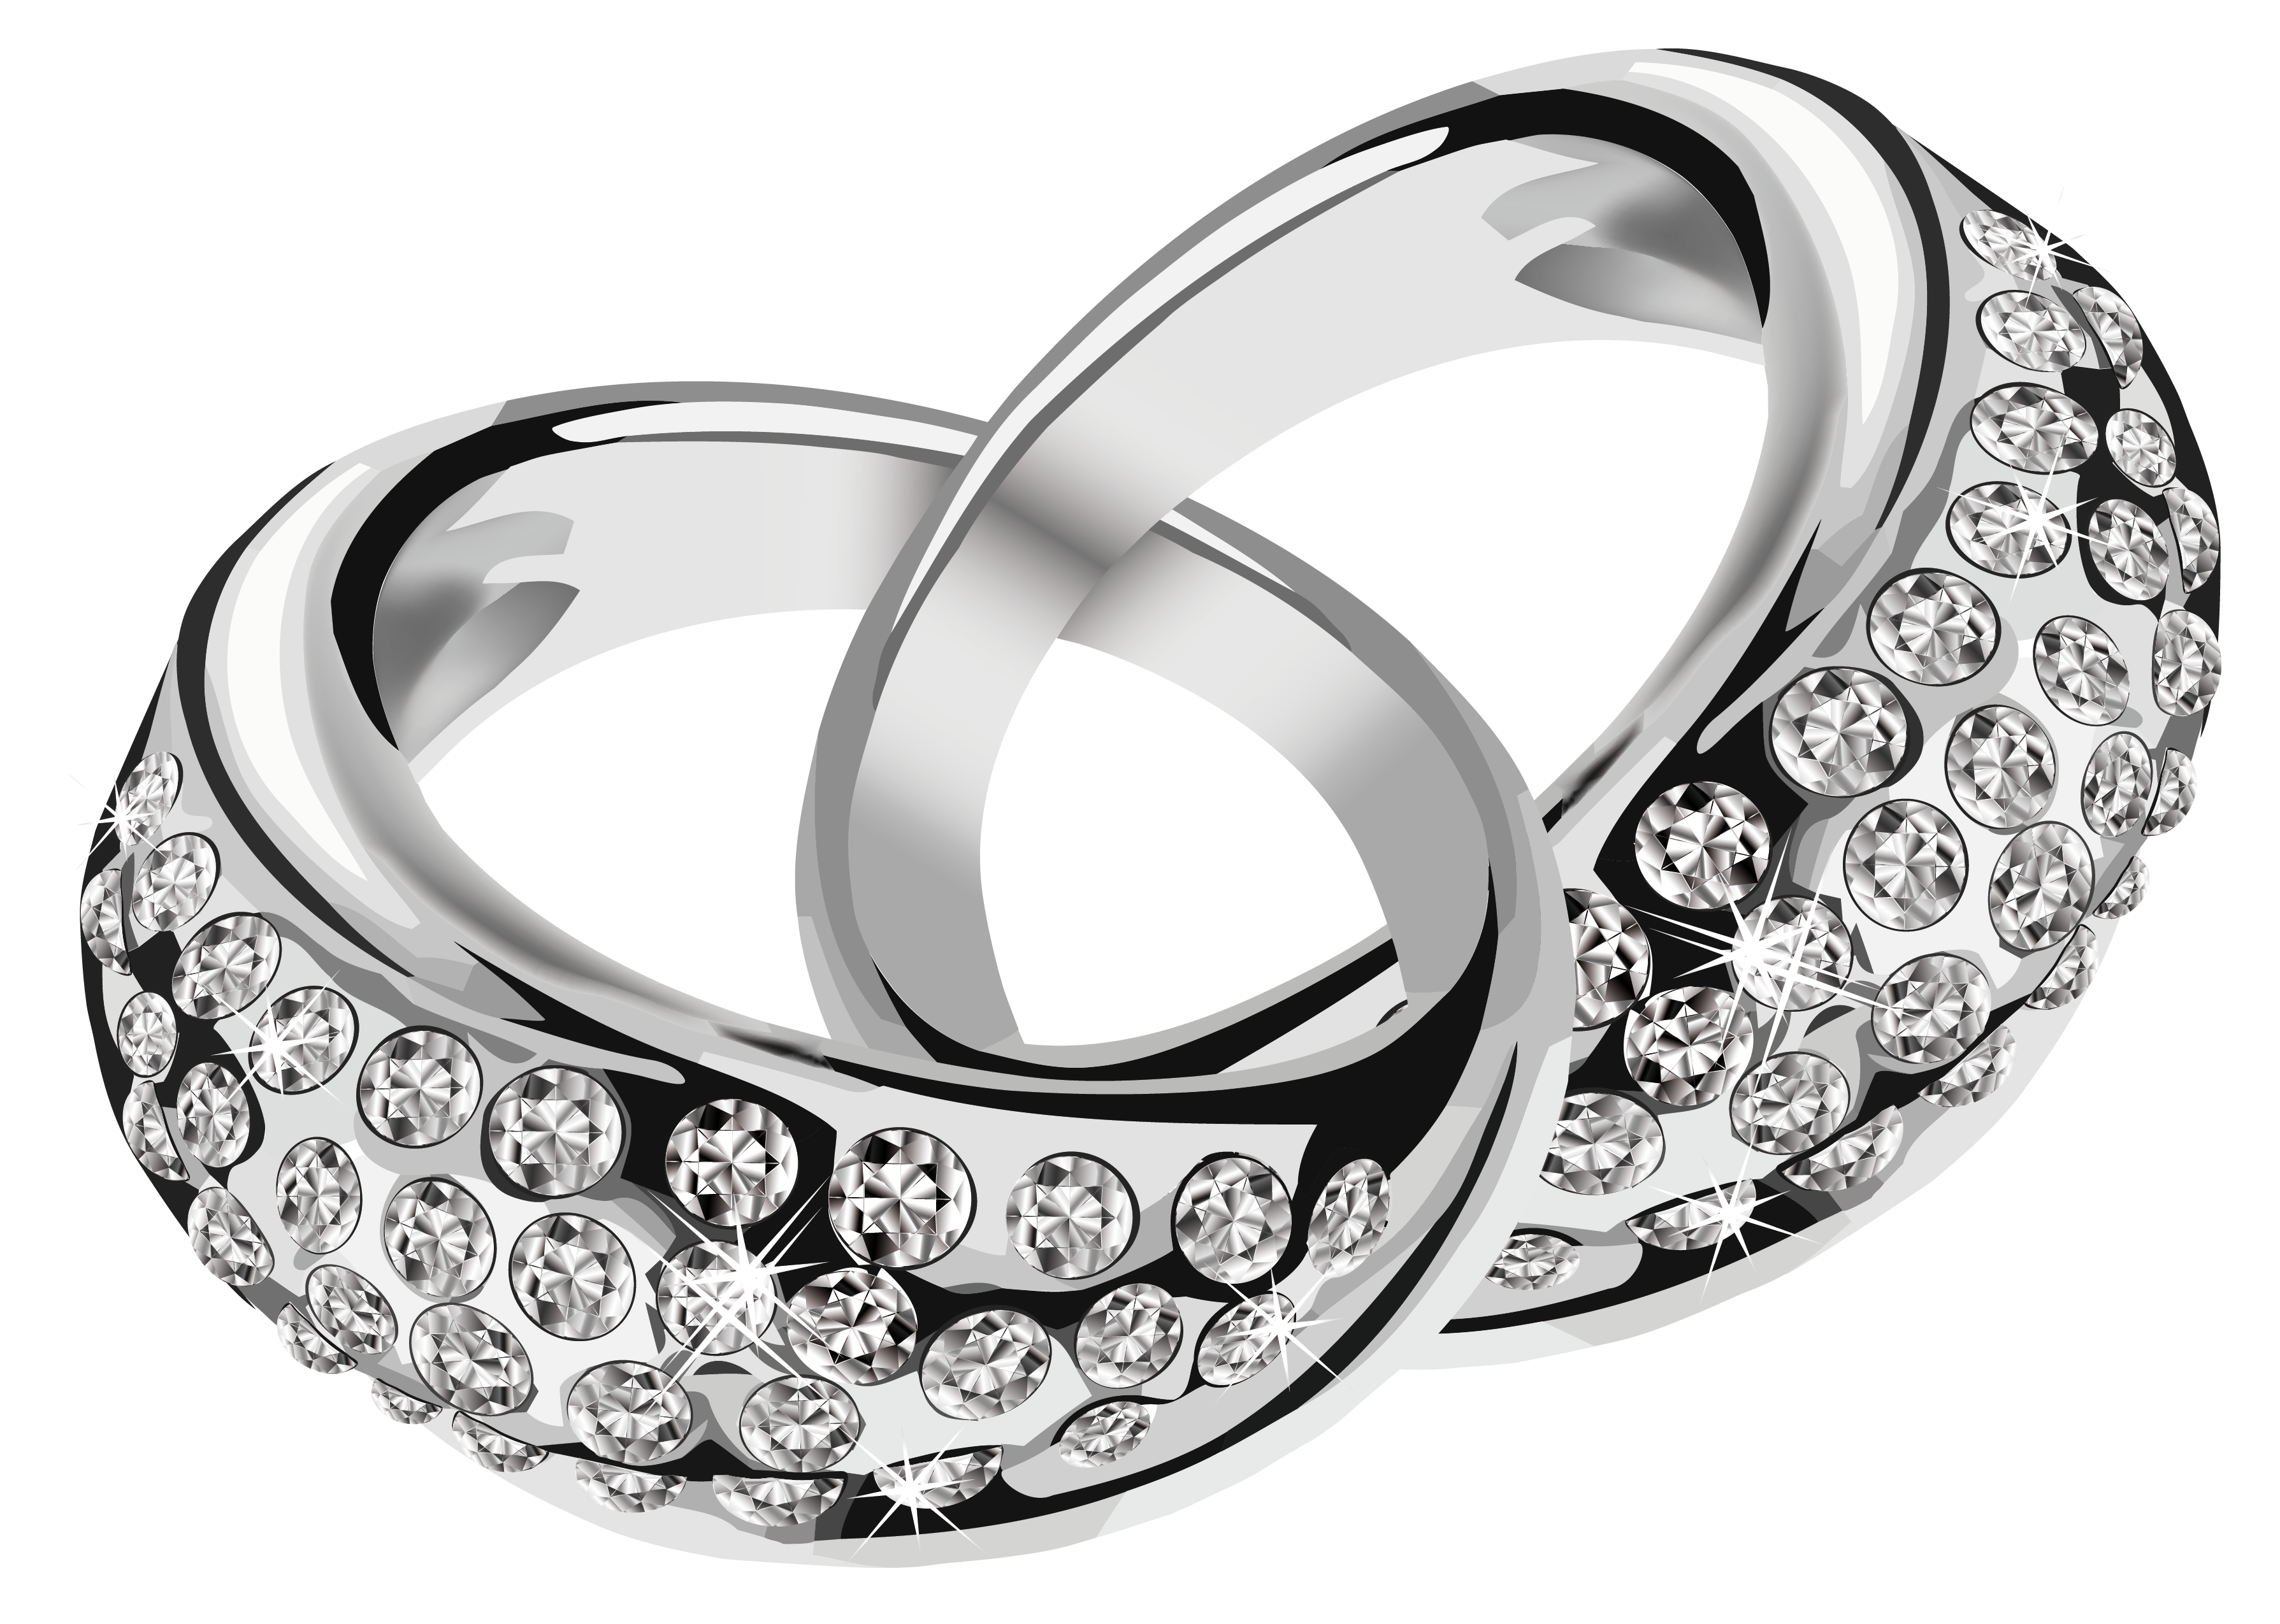 clipart images of jewelry - photo #32